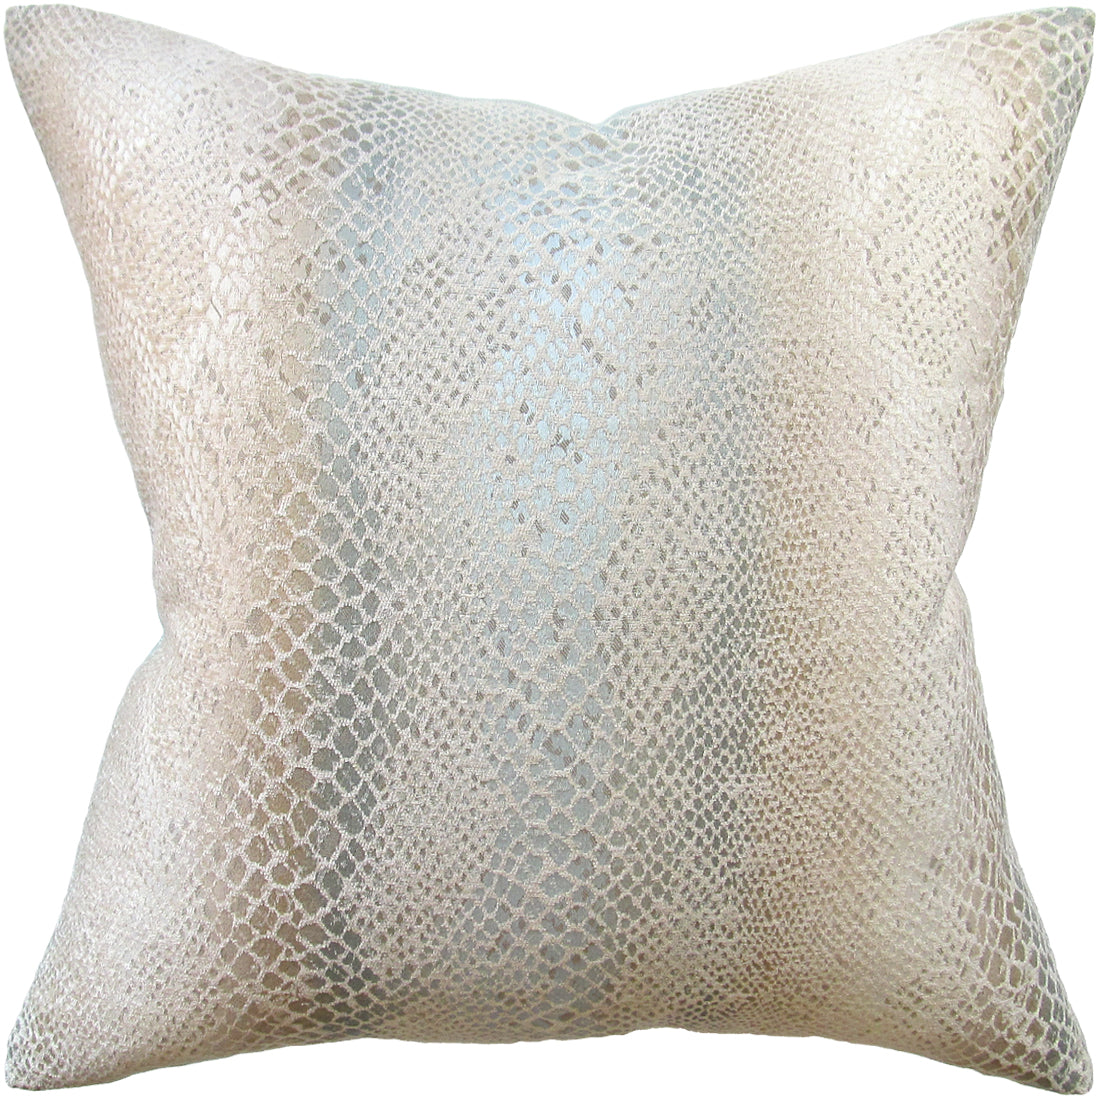 Lizzie Pillow in Mineral